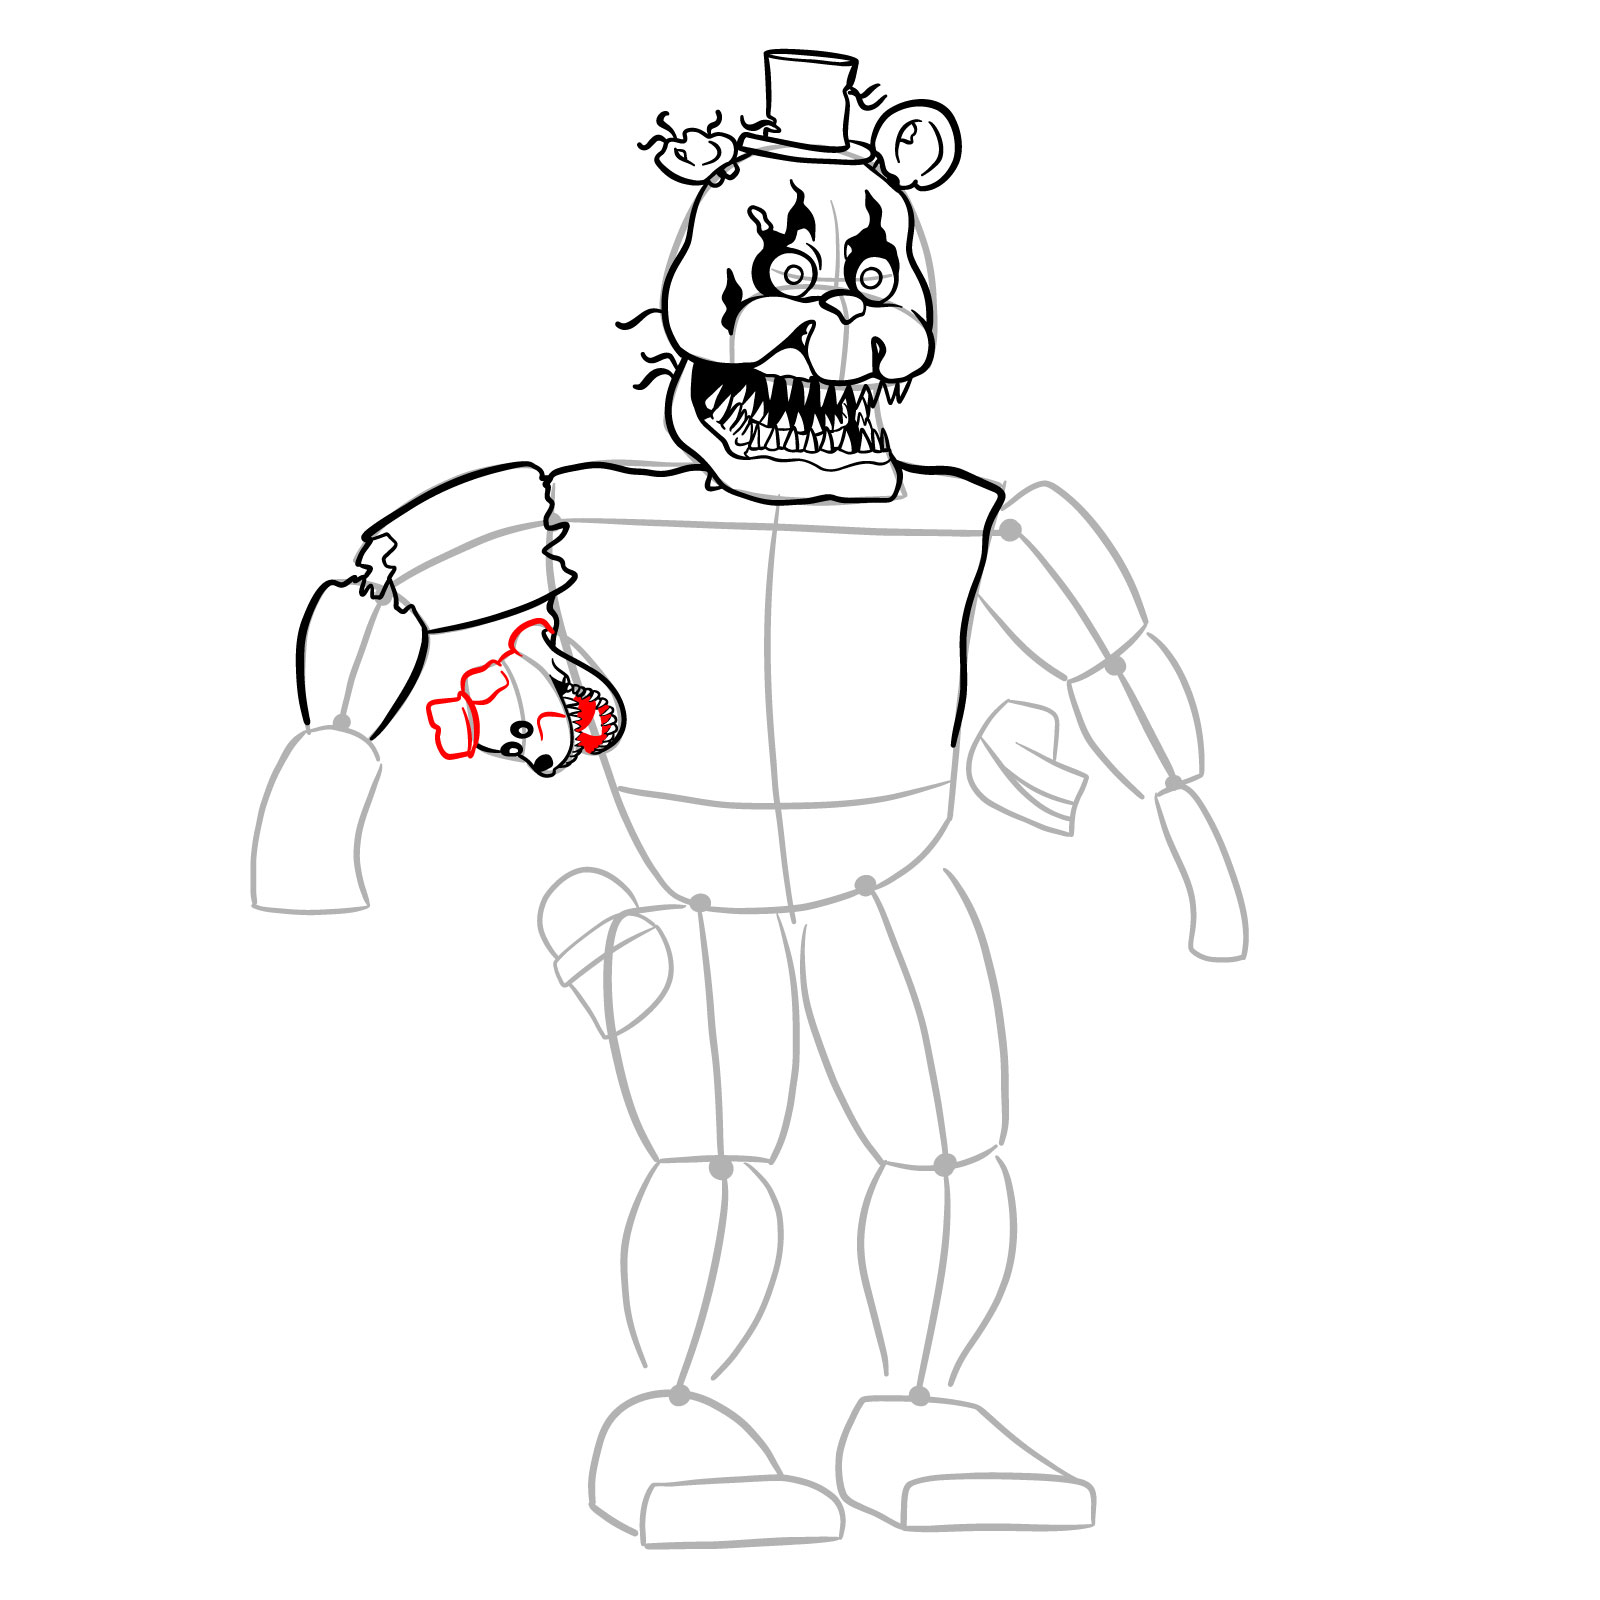 How to draw Nightmare Freddy - step 22